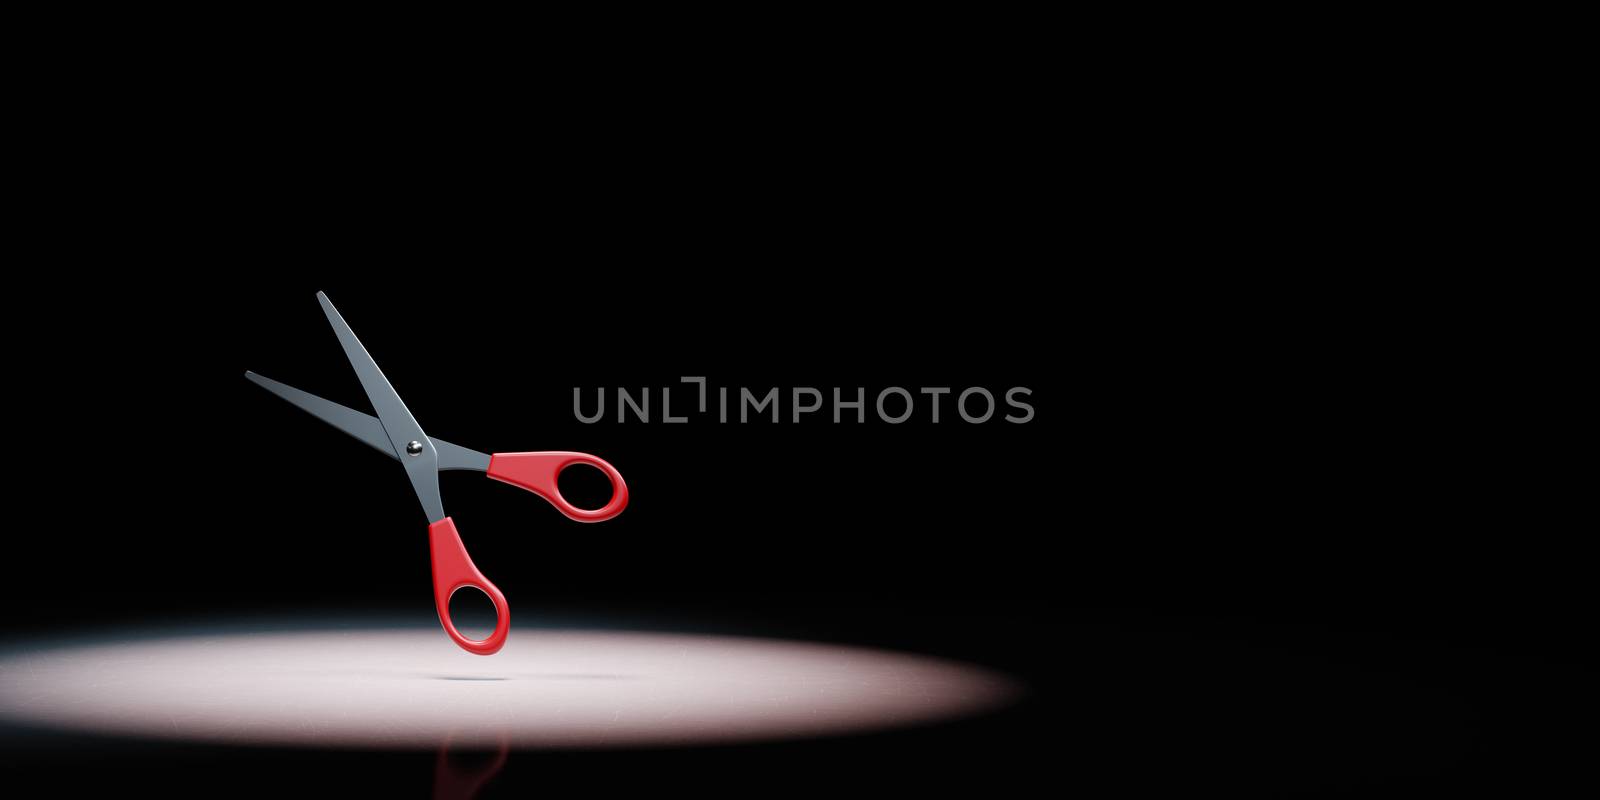 Pair of Metal Scissors with Red Hilt Spotlighted on Black Background with Copy Space 3D Illustration